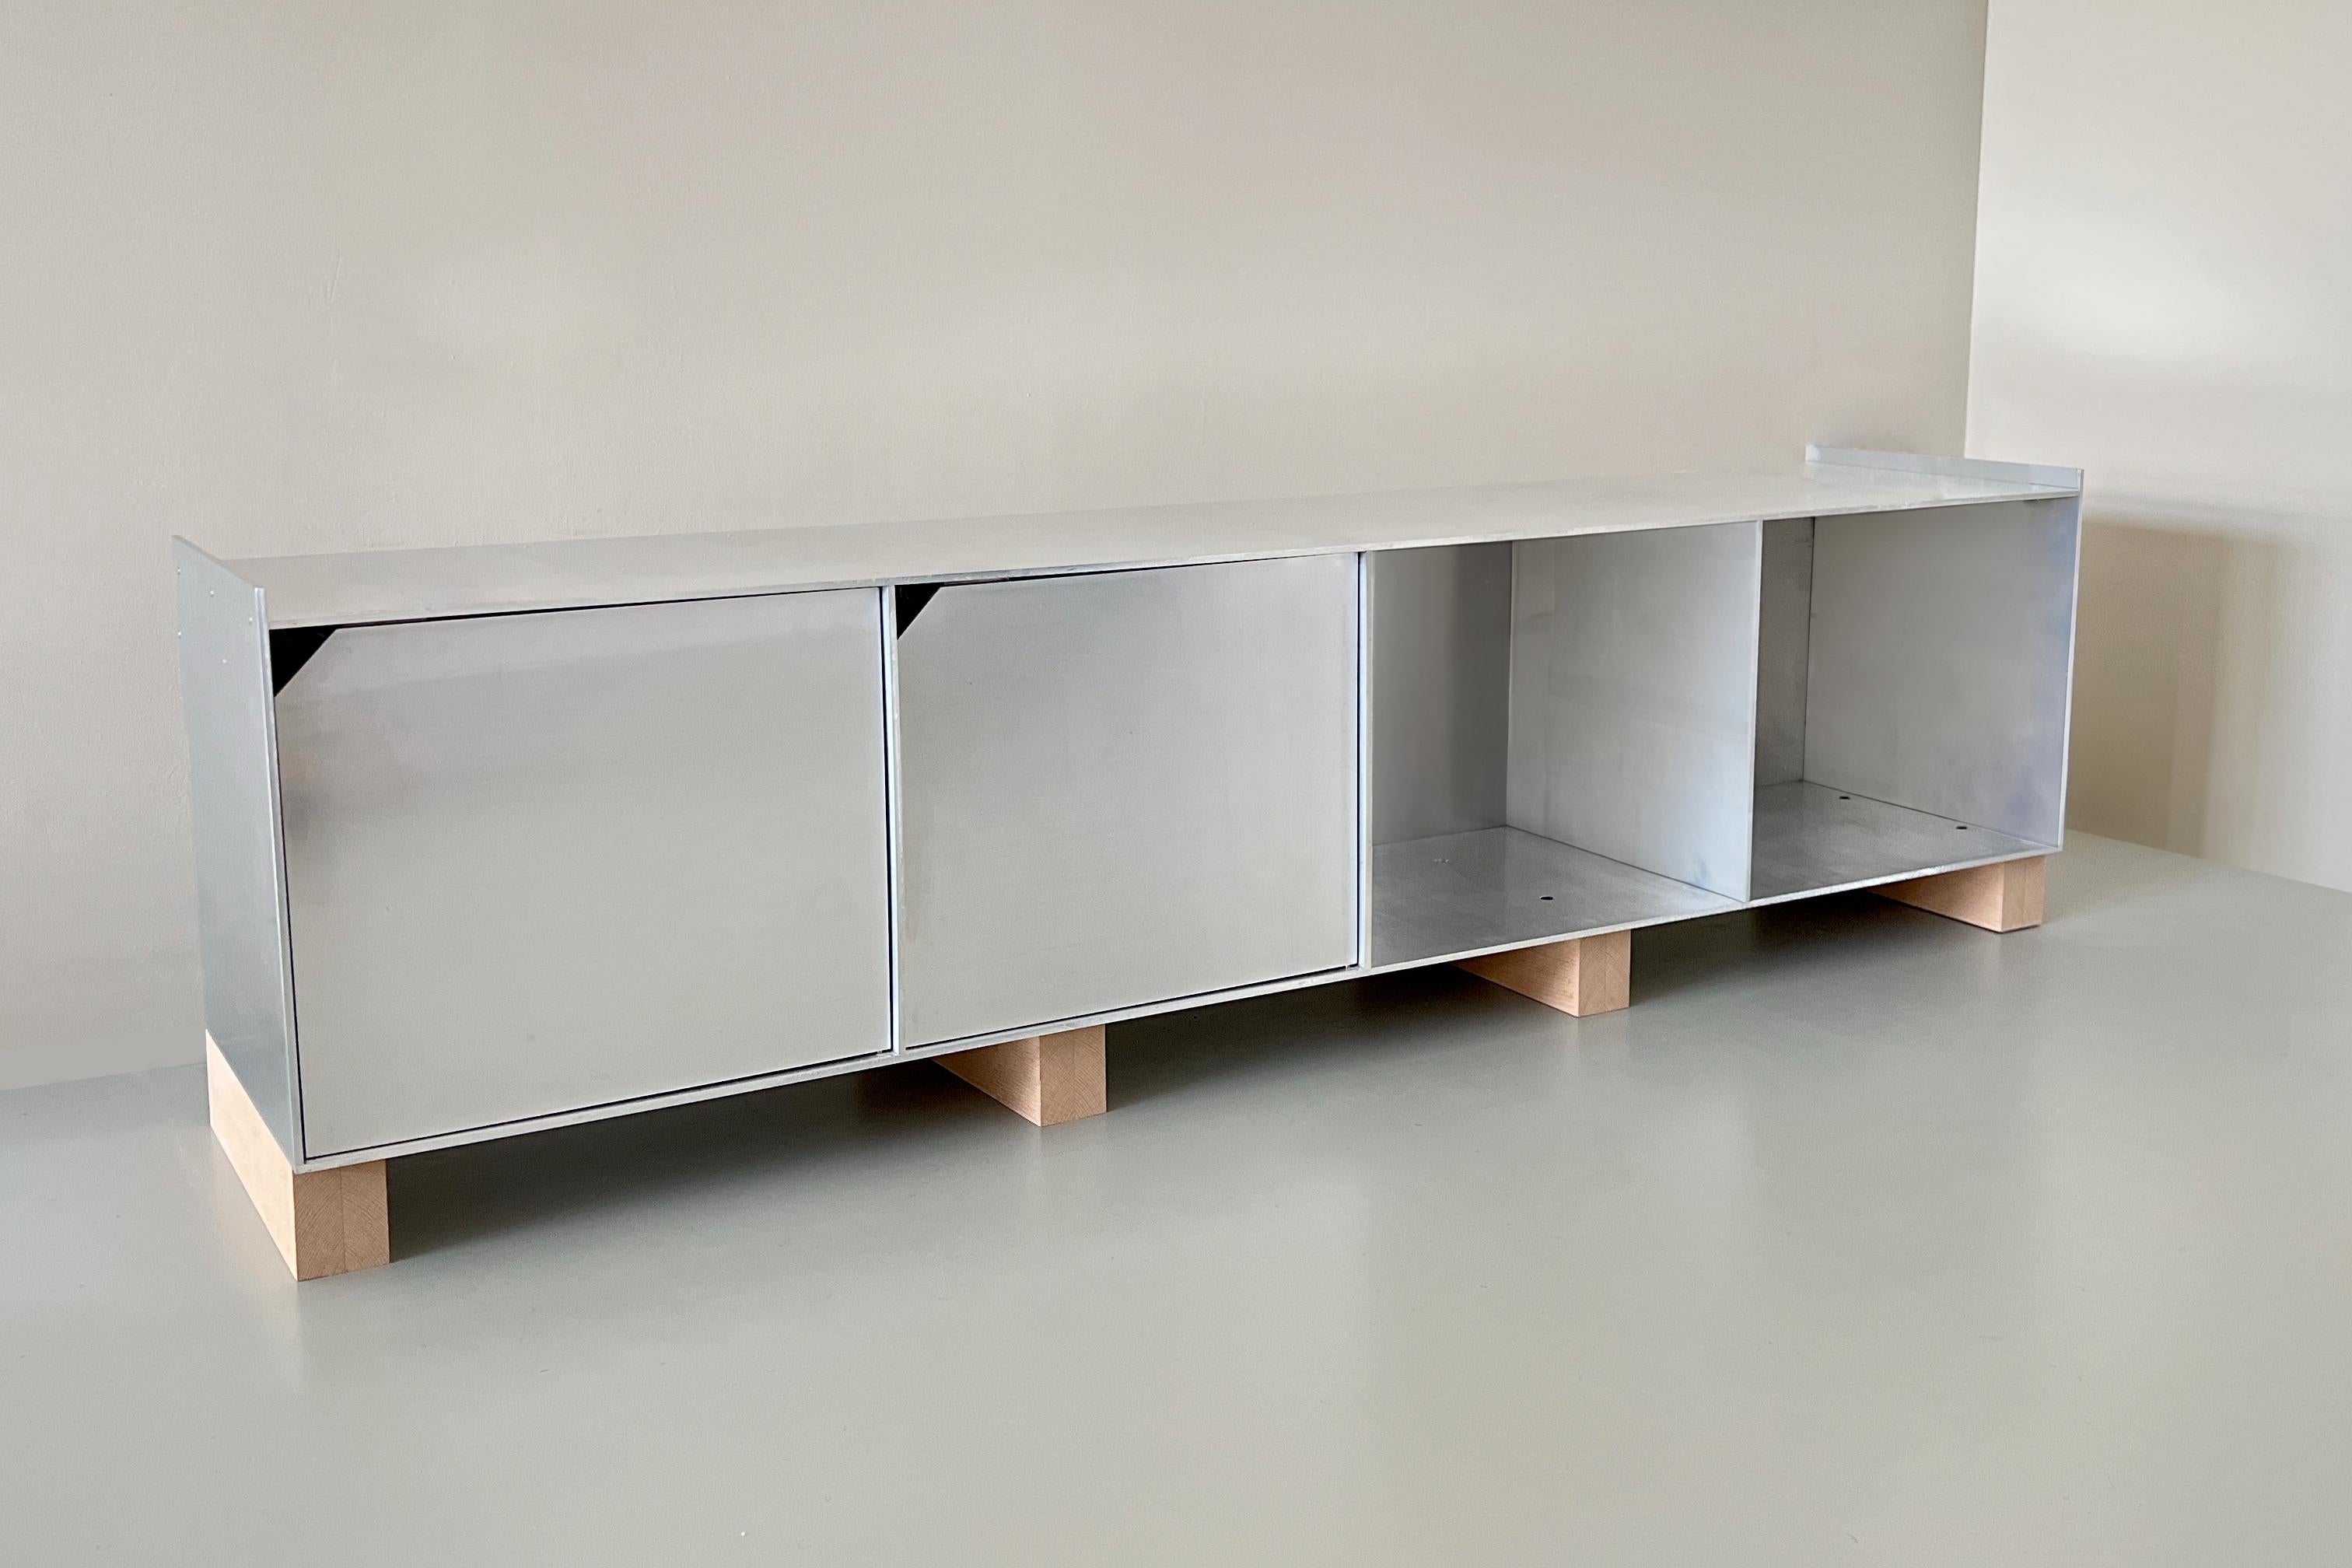 'Upton' Low Sideboard is a beautifully simplistic piece that shows the aluminium in its raw form, with contrasting beech legs.

The sheets of aluminium plate are left machine milled and are mechanically fixed together using countersunk bolts.

The